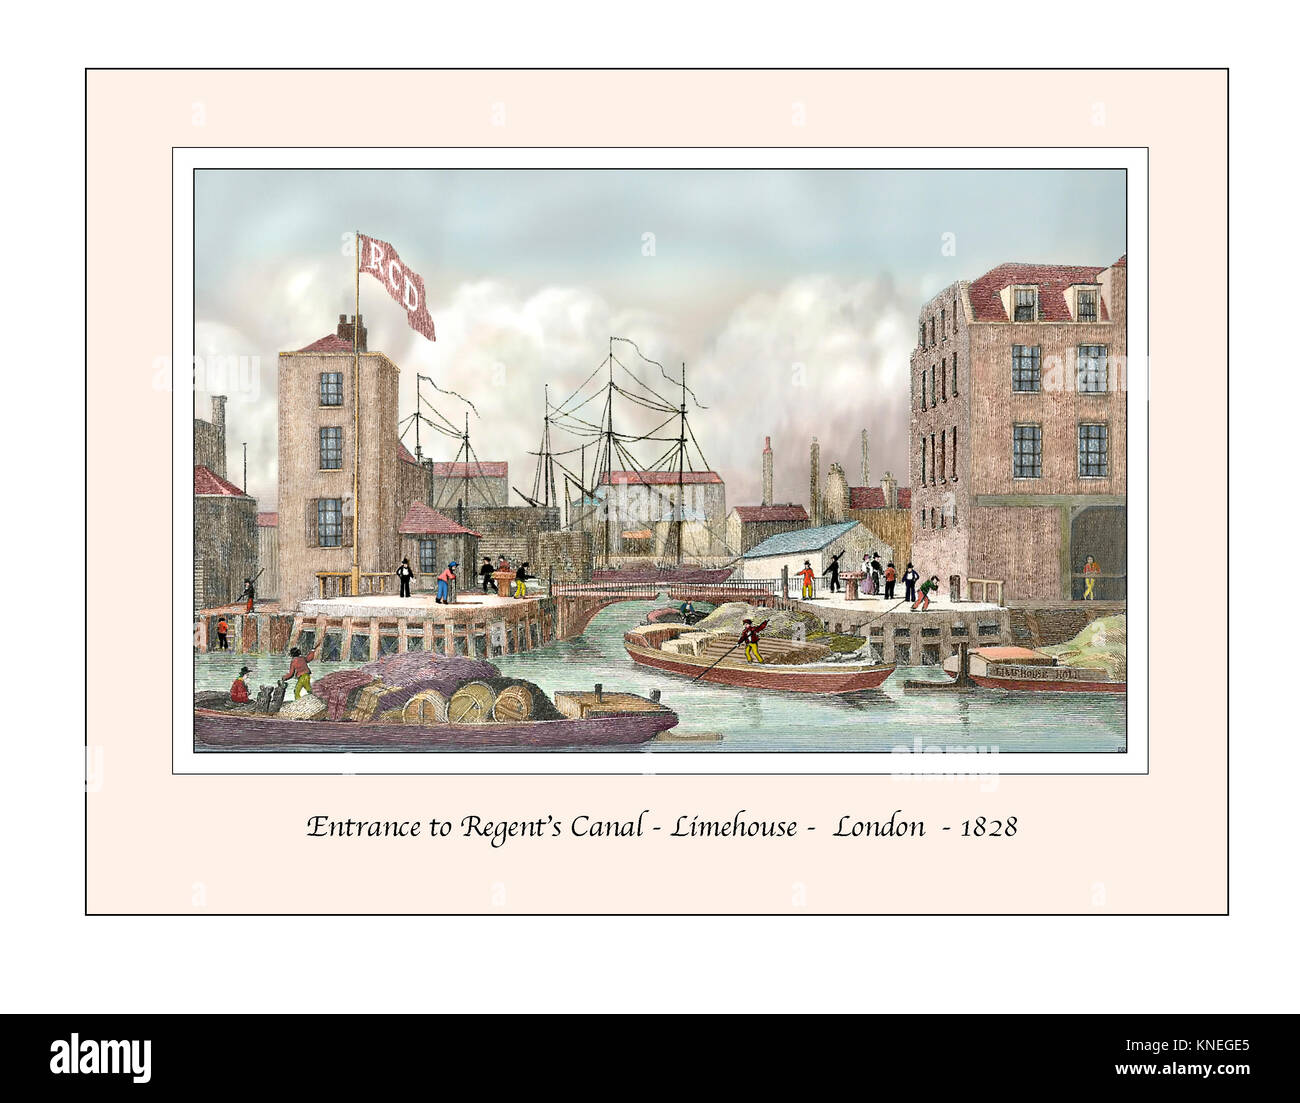 Regents Canal Limehouse Entrance Original Design based on a 19th century Engraving Stock Photo